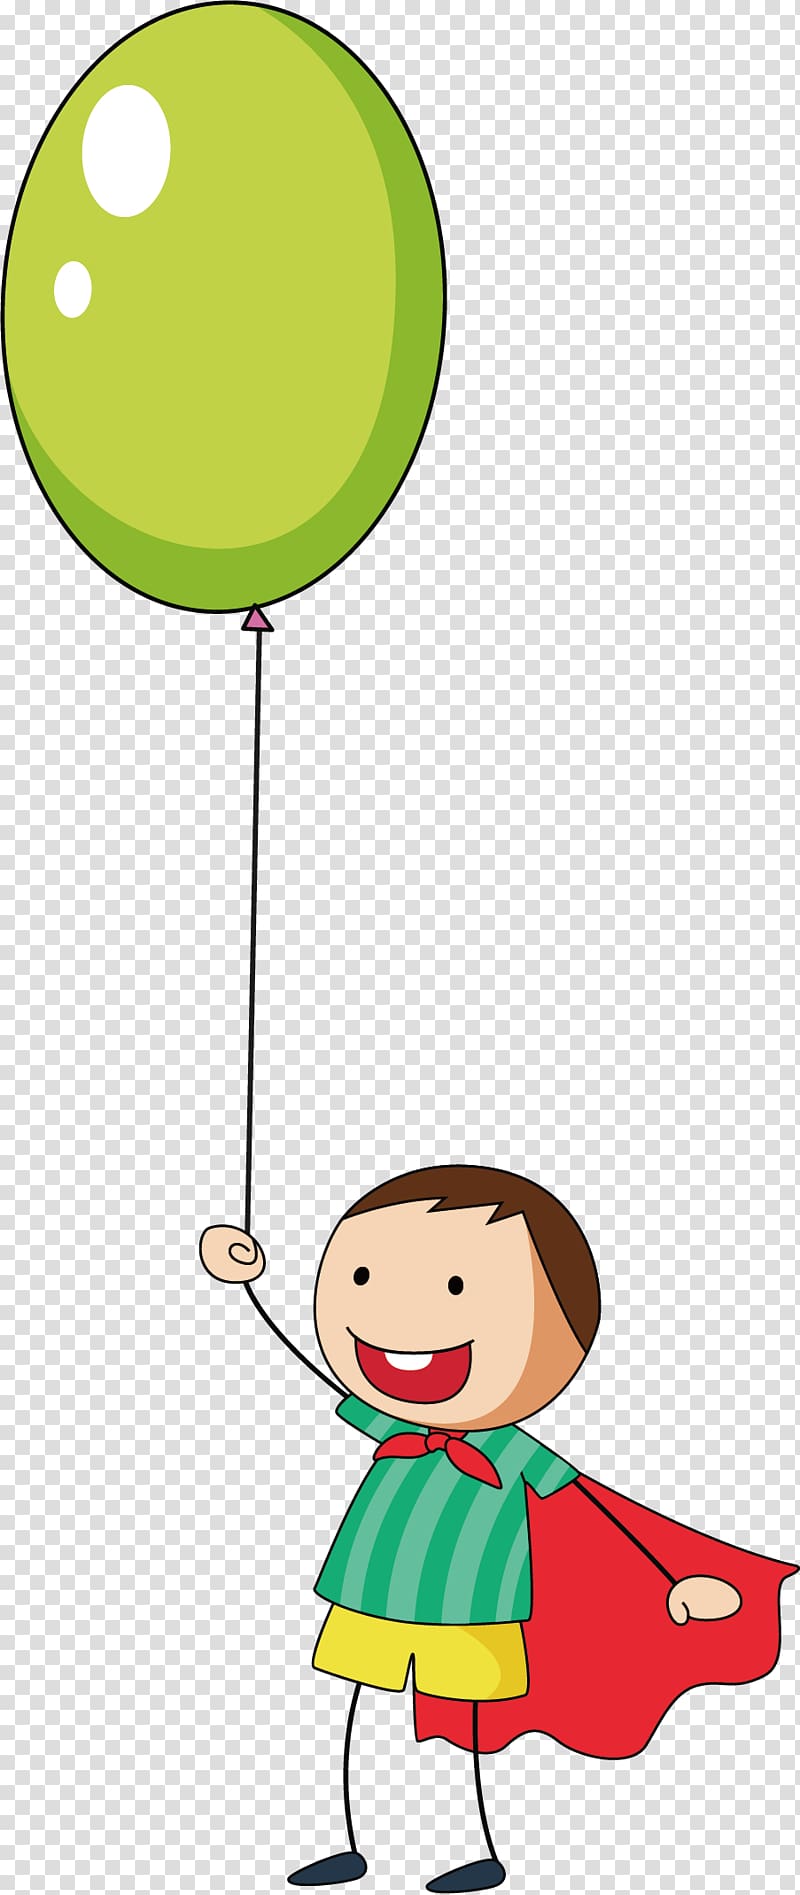 Child All Ordinaries Drawing Australian Securities Exchange, illustration of a boy playing balloons transparent background PNG clipart